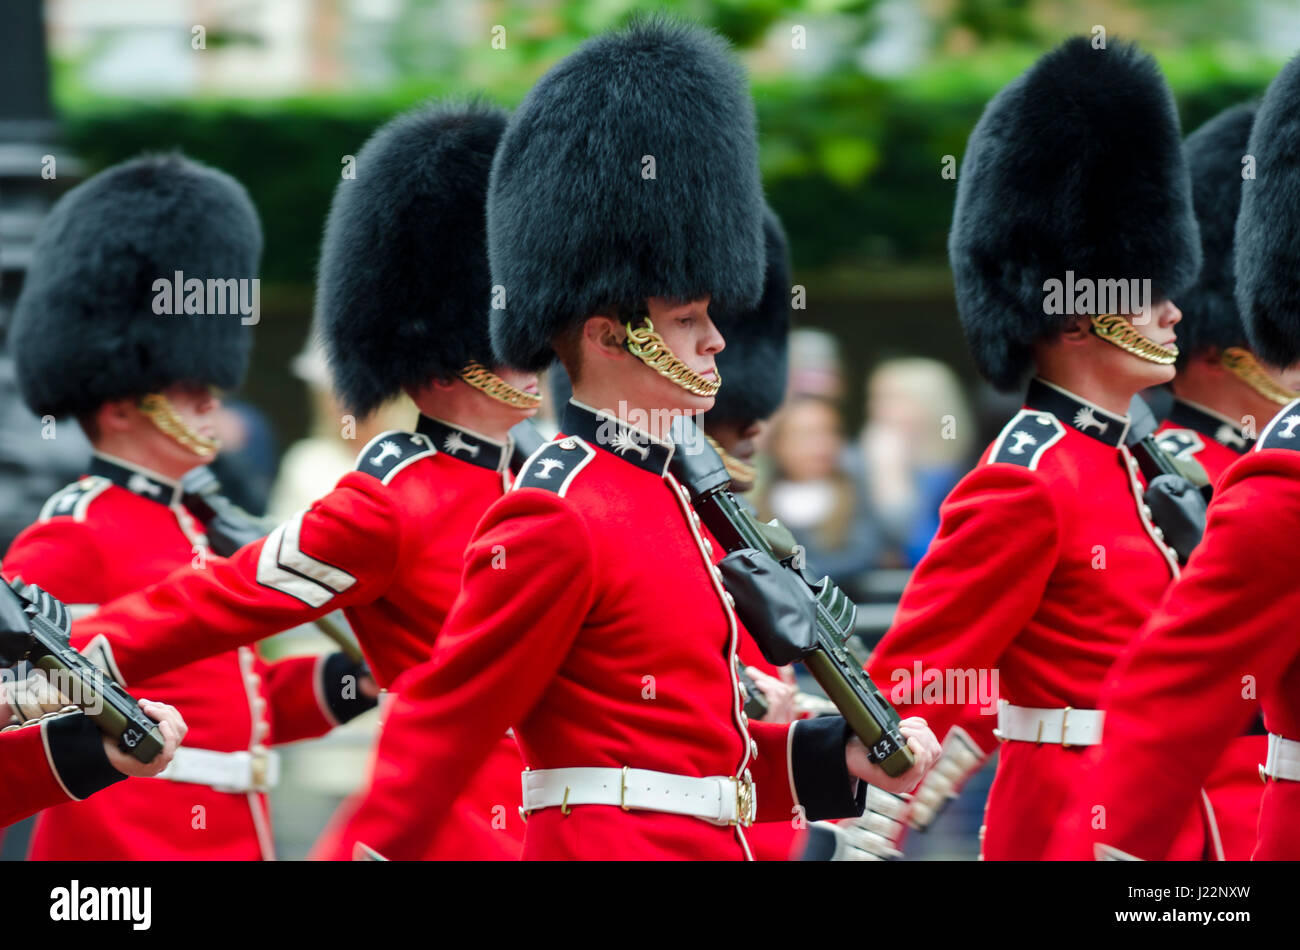 LONDON - JUNE 13, 2015: Members of the Queen's Royal Guard march on The Mall in a ceremony for Her Majesty's birthday celebration. Stock Photo